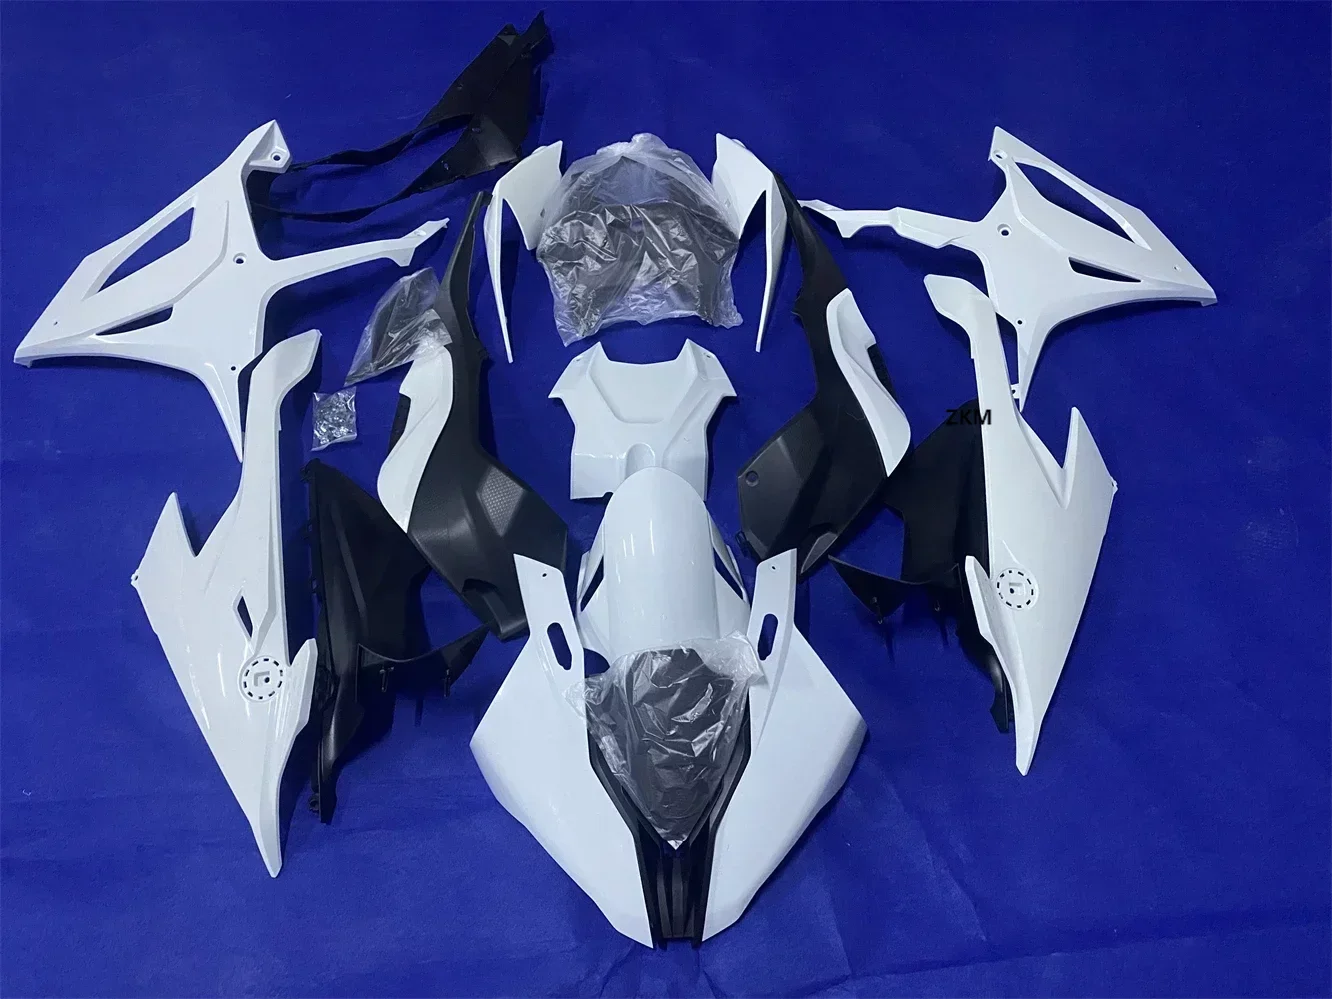 

Motorcycle Fairings Kit Fit For M1000RR S1000rr 2019 2020 2021 2022 Bodywork Set 19 20 21 22 High Quality Injection White germ